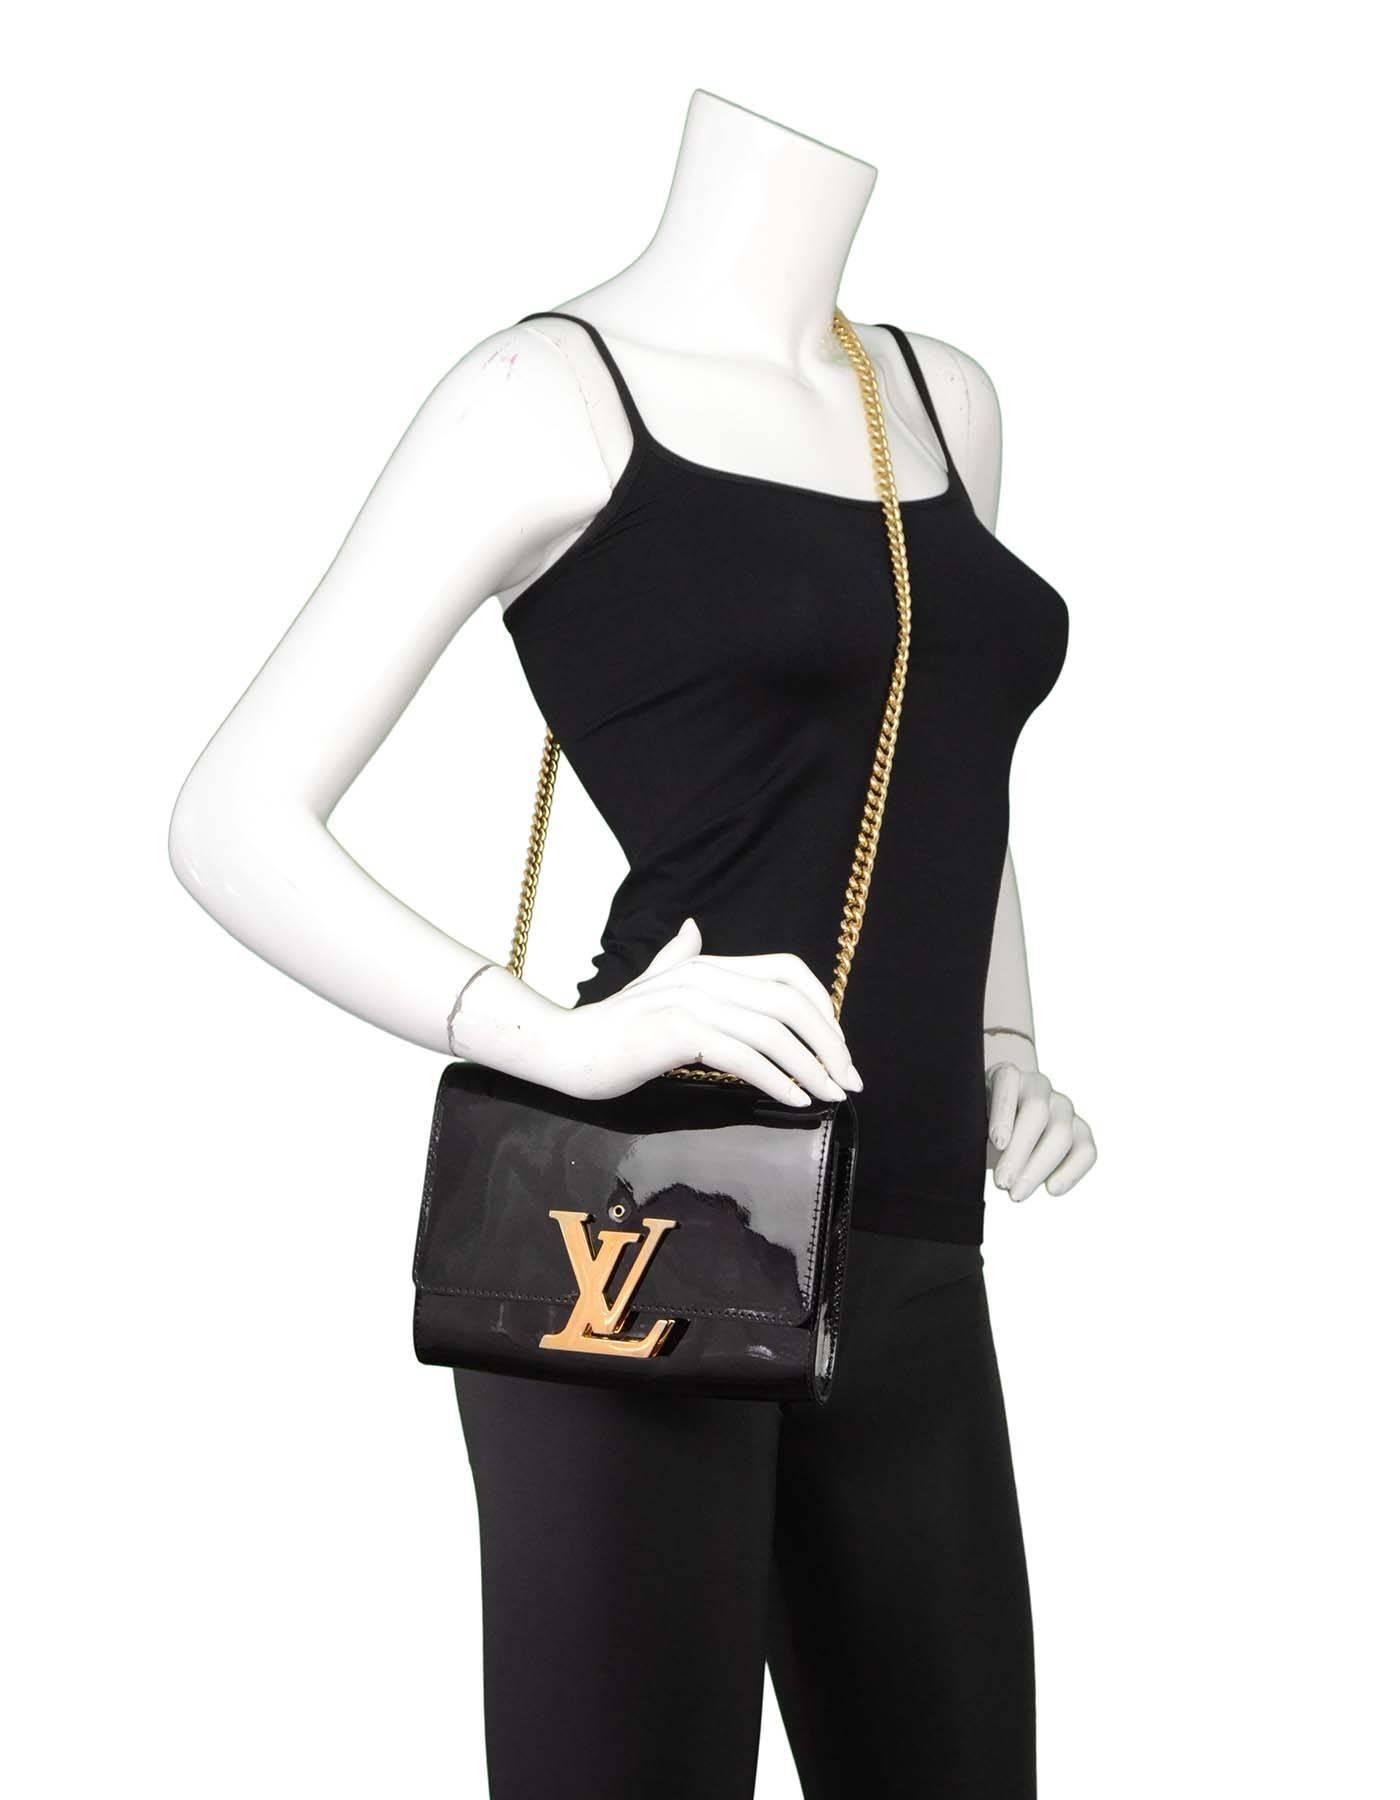 Louis Vuitton Black Patent Leather Sliding Chain Louis Bag with GHW 

Made In: France
Year of Production: 2015
Color: Black
Hardware: Goldtone
Materials: Patent leather
Lining: Black textile
Closure/Opening: Flap top with LV